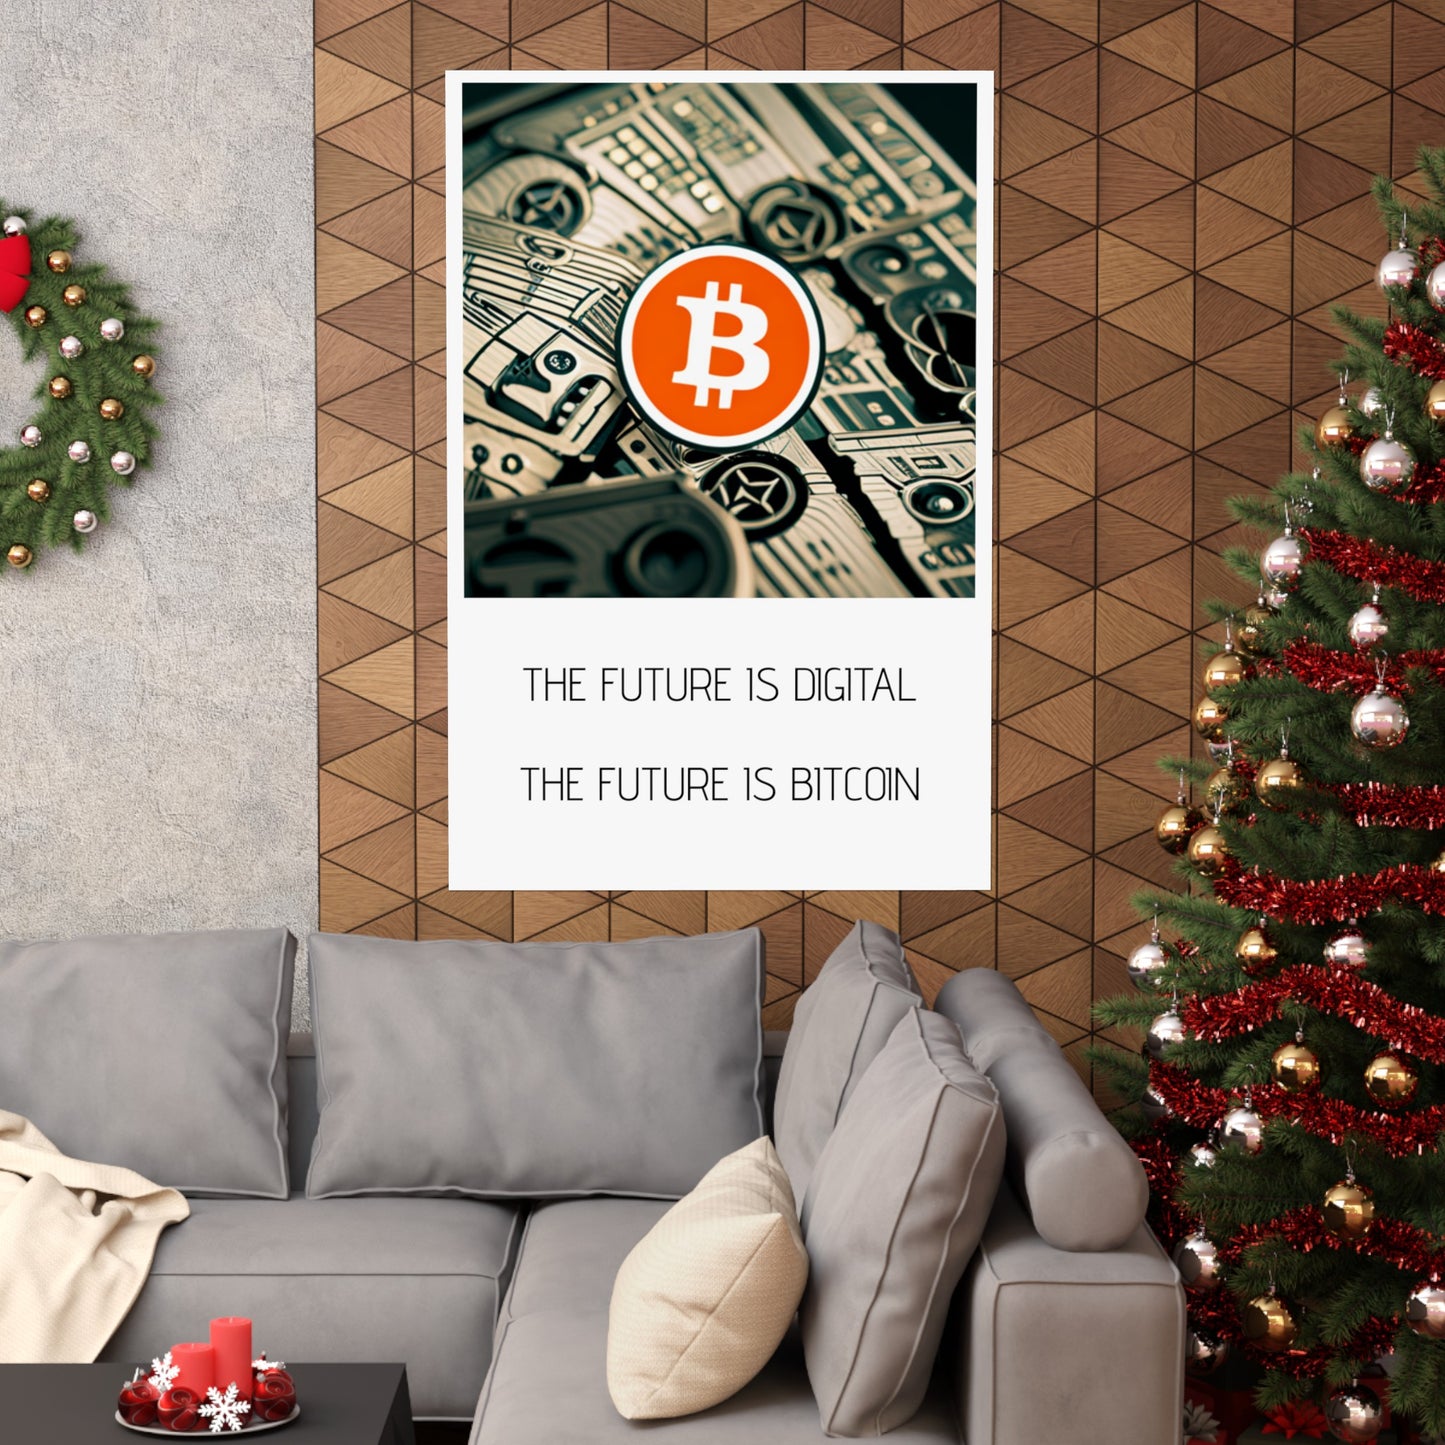 THE FUTURE IS DIGITAL/BITCOIN POSTER